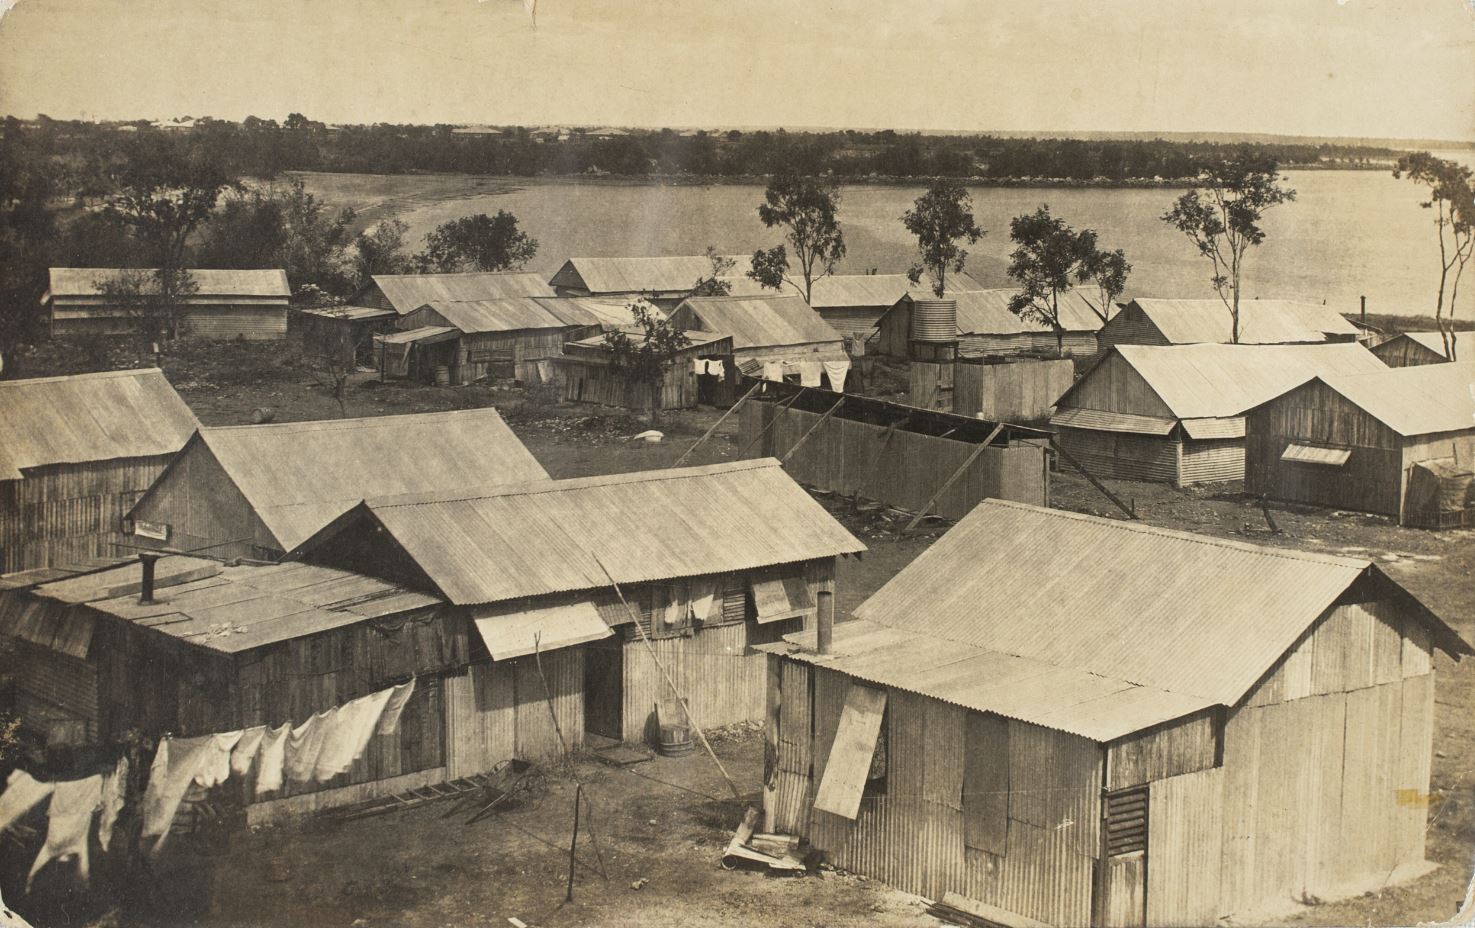 Elevated view of staff houses at the Vestey’s Meatworks, Bullocky Point, Darwin.